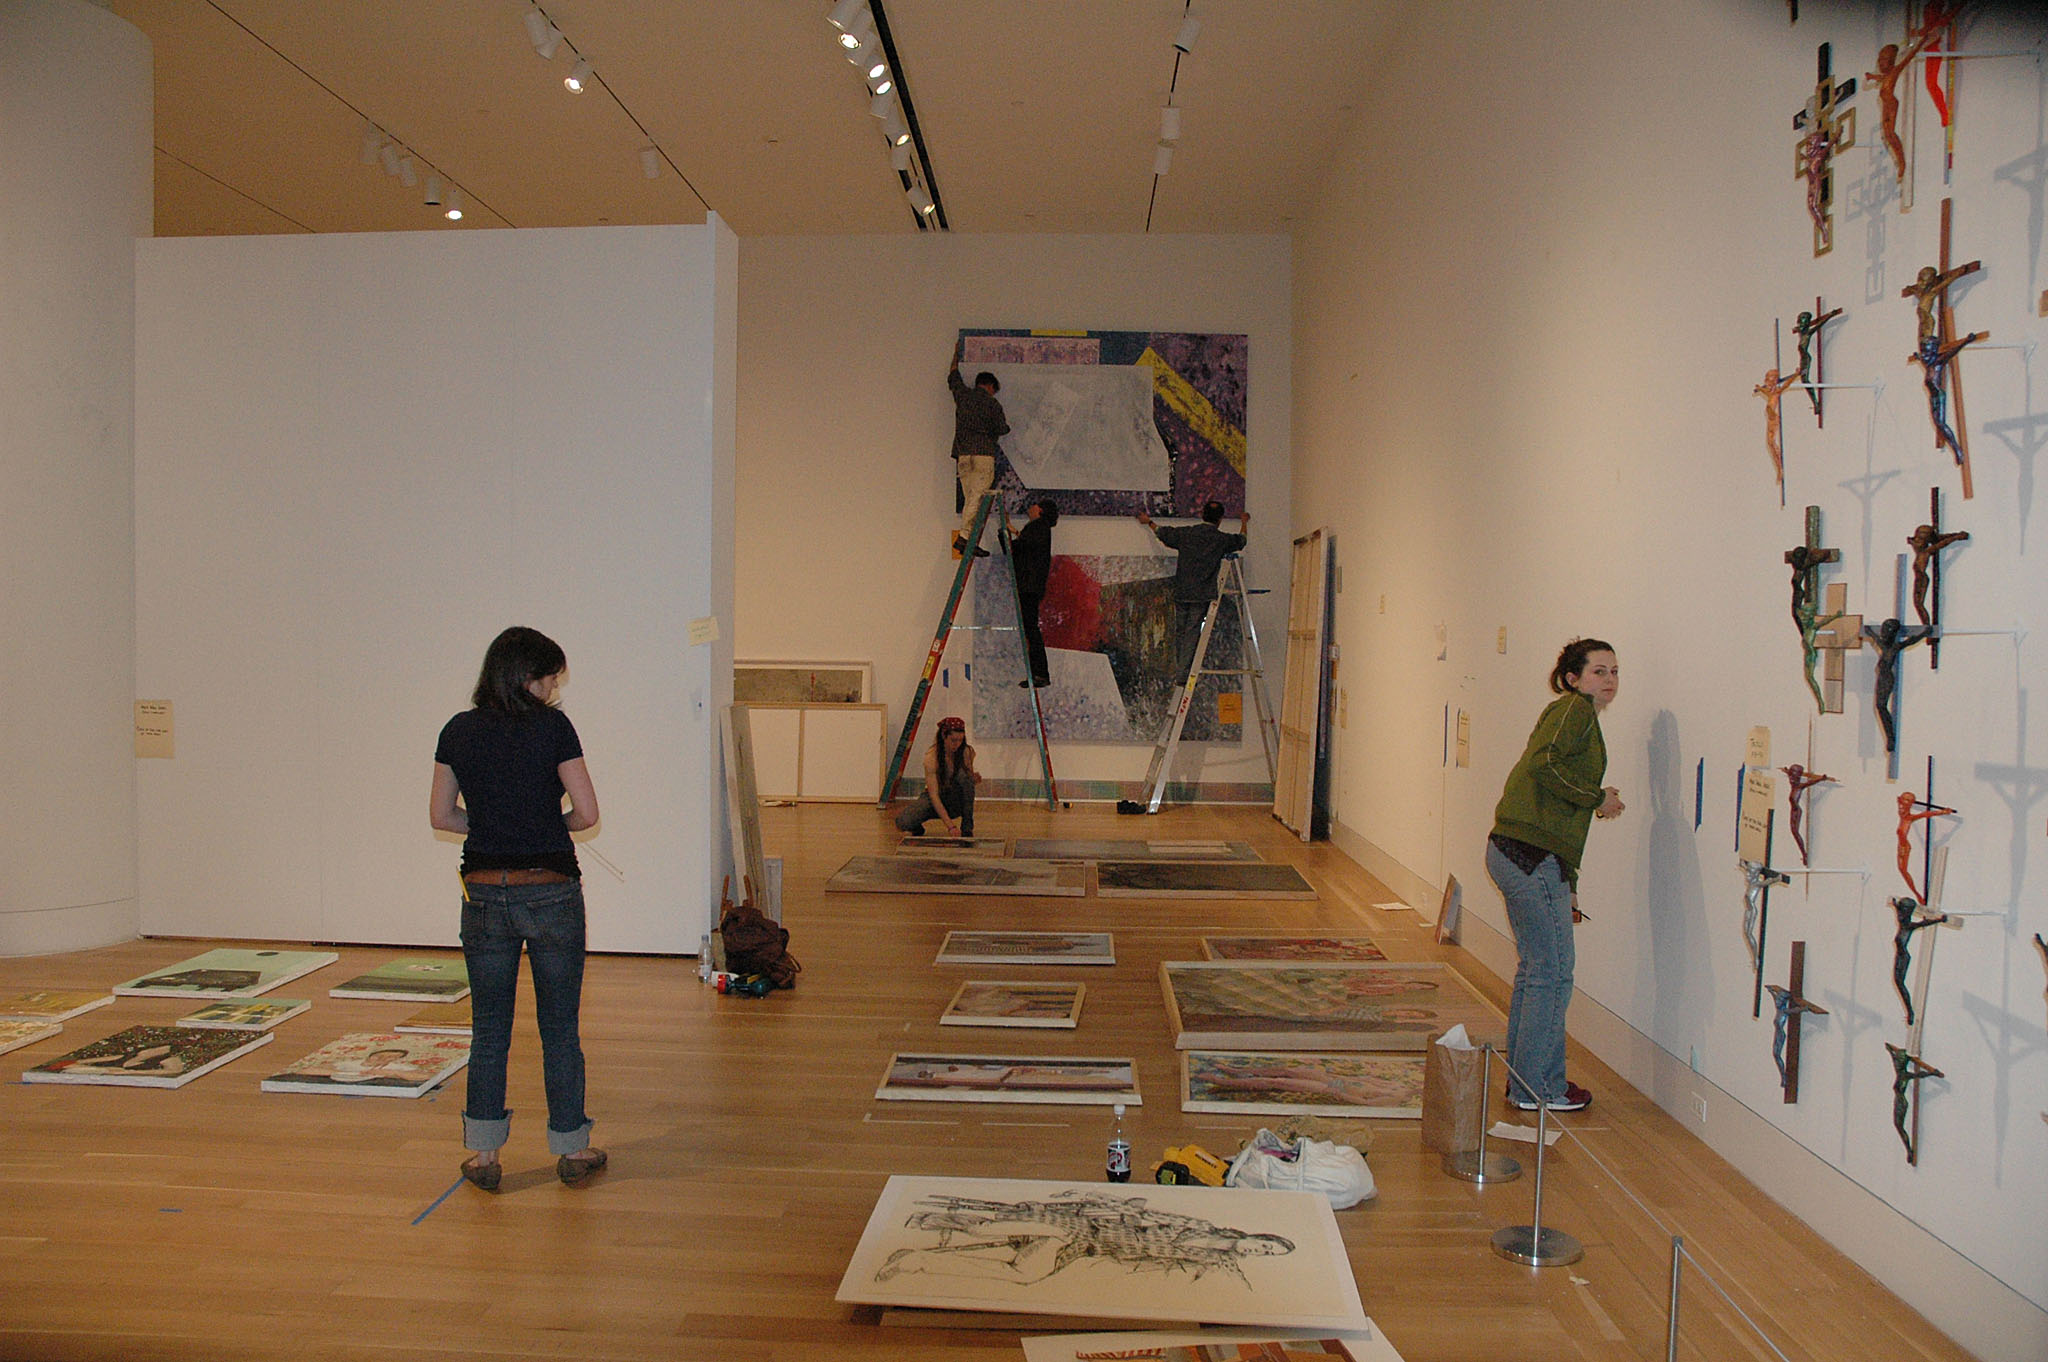 
Students installing works of art for the 104th Annual Student Exhibition